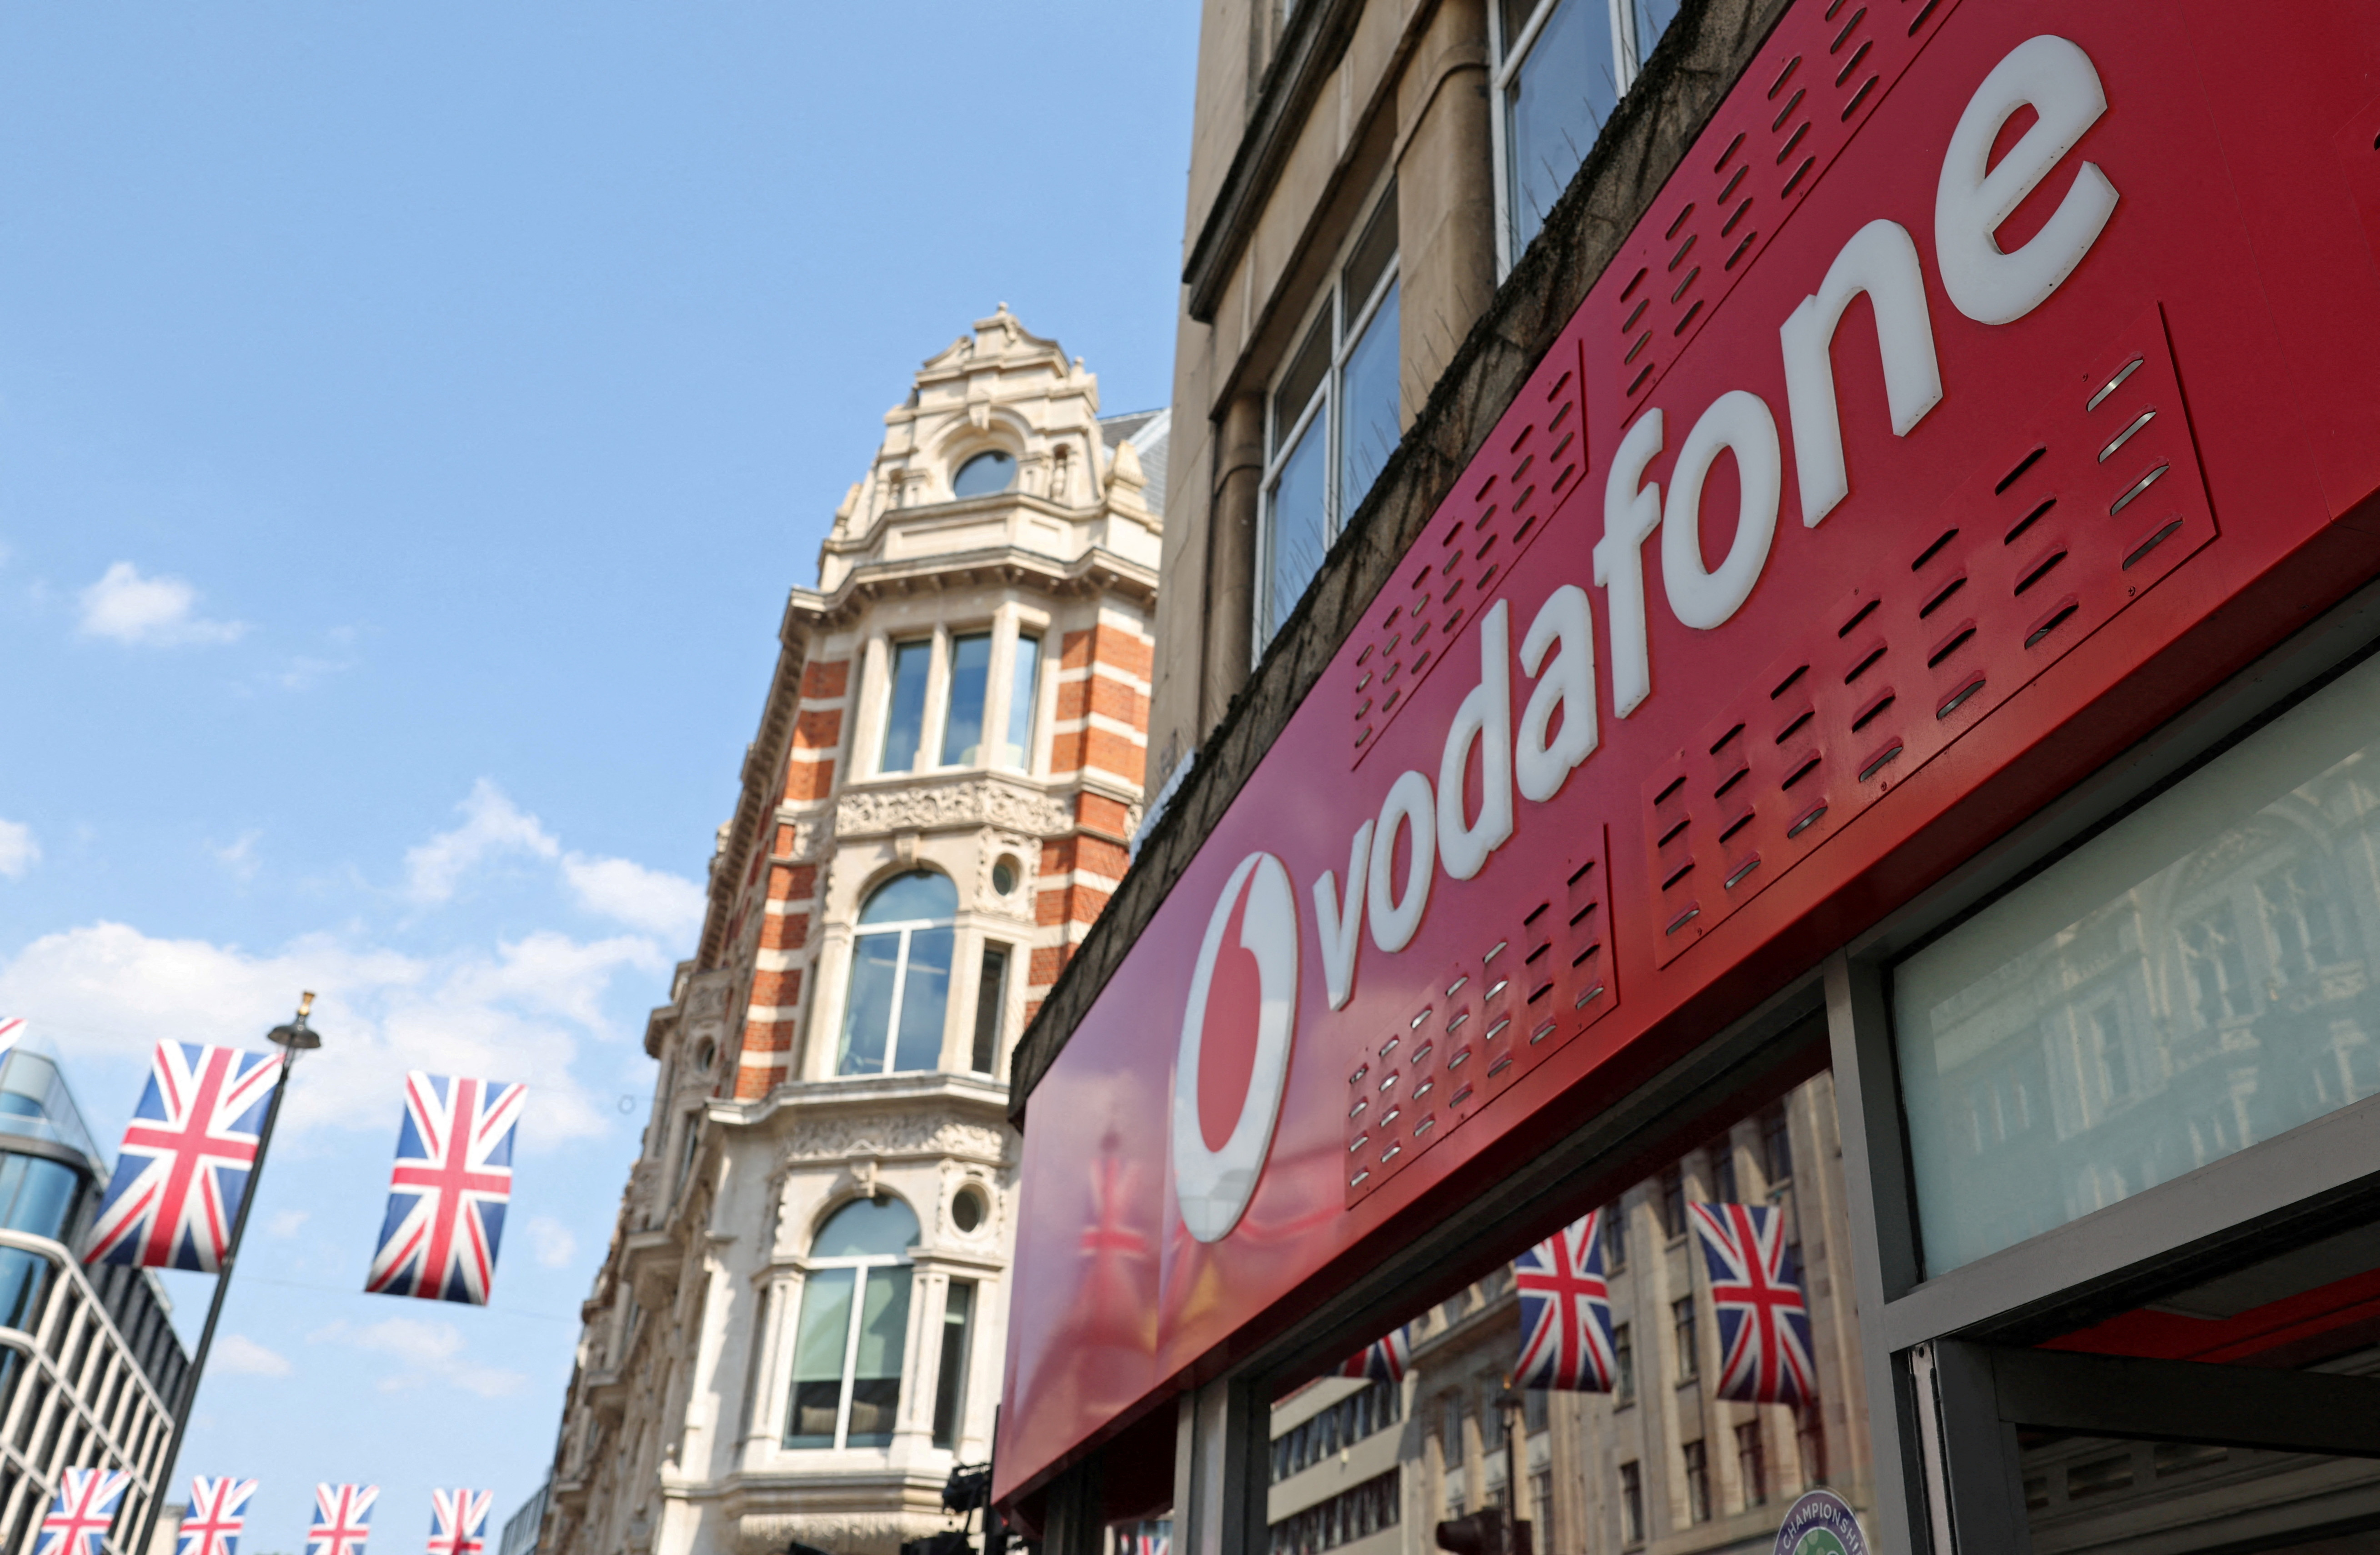 Branding is displayed for Vodafone at one of its stores in London